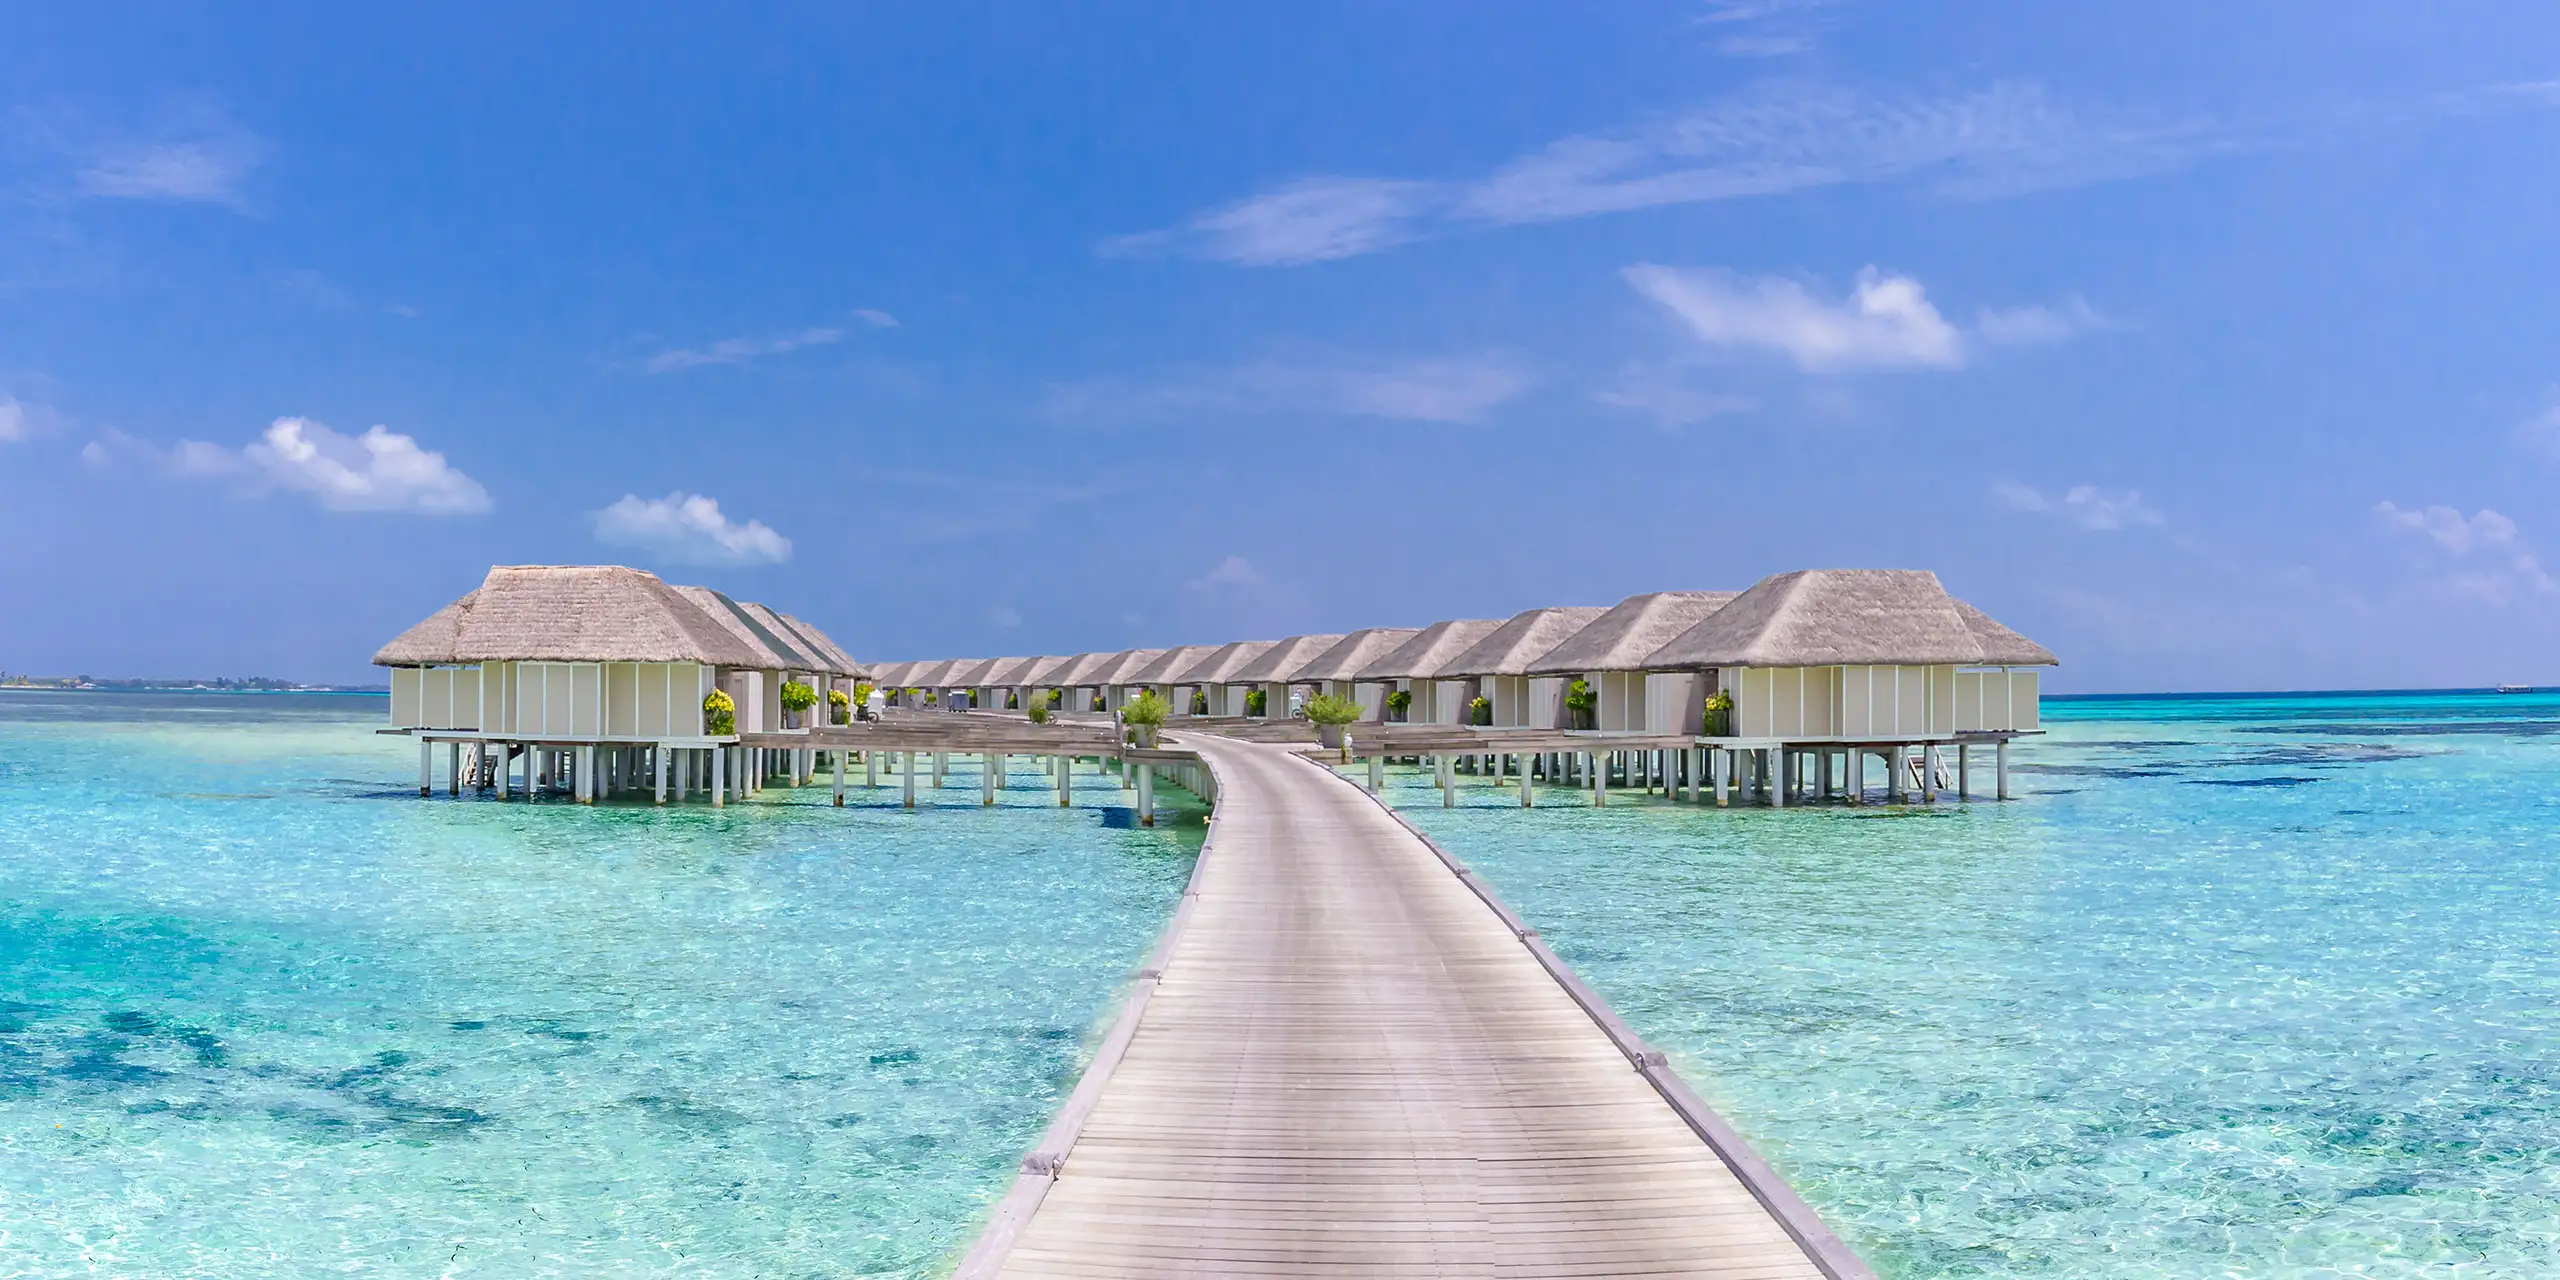 Overwater Bungalows; Courtesy of icemanphotos/Shutterstock.com